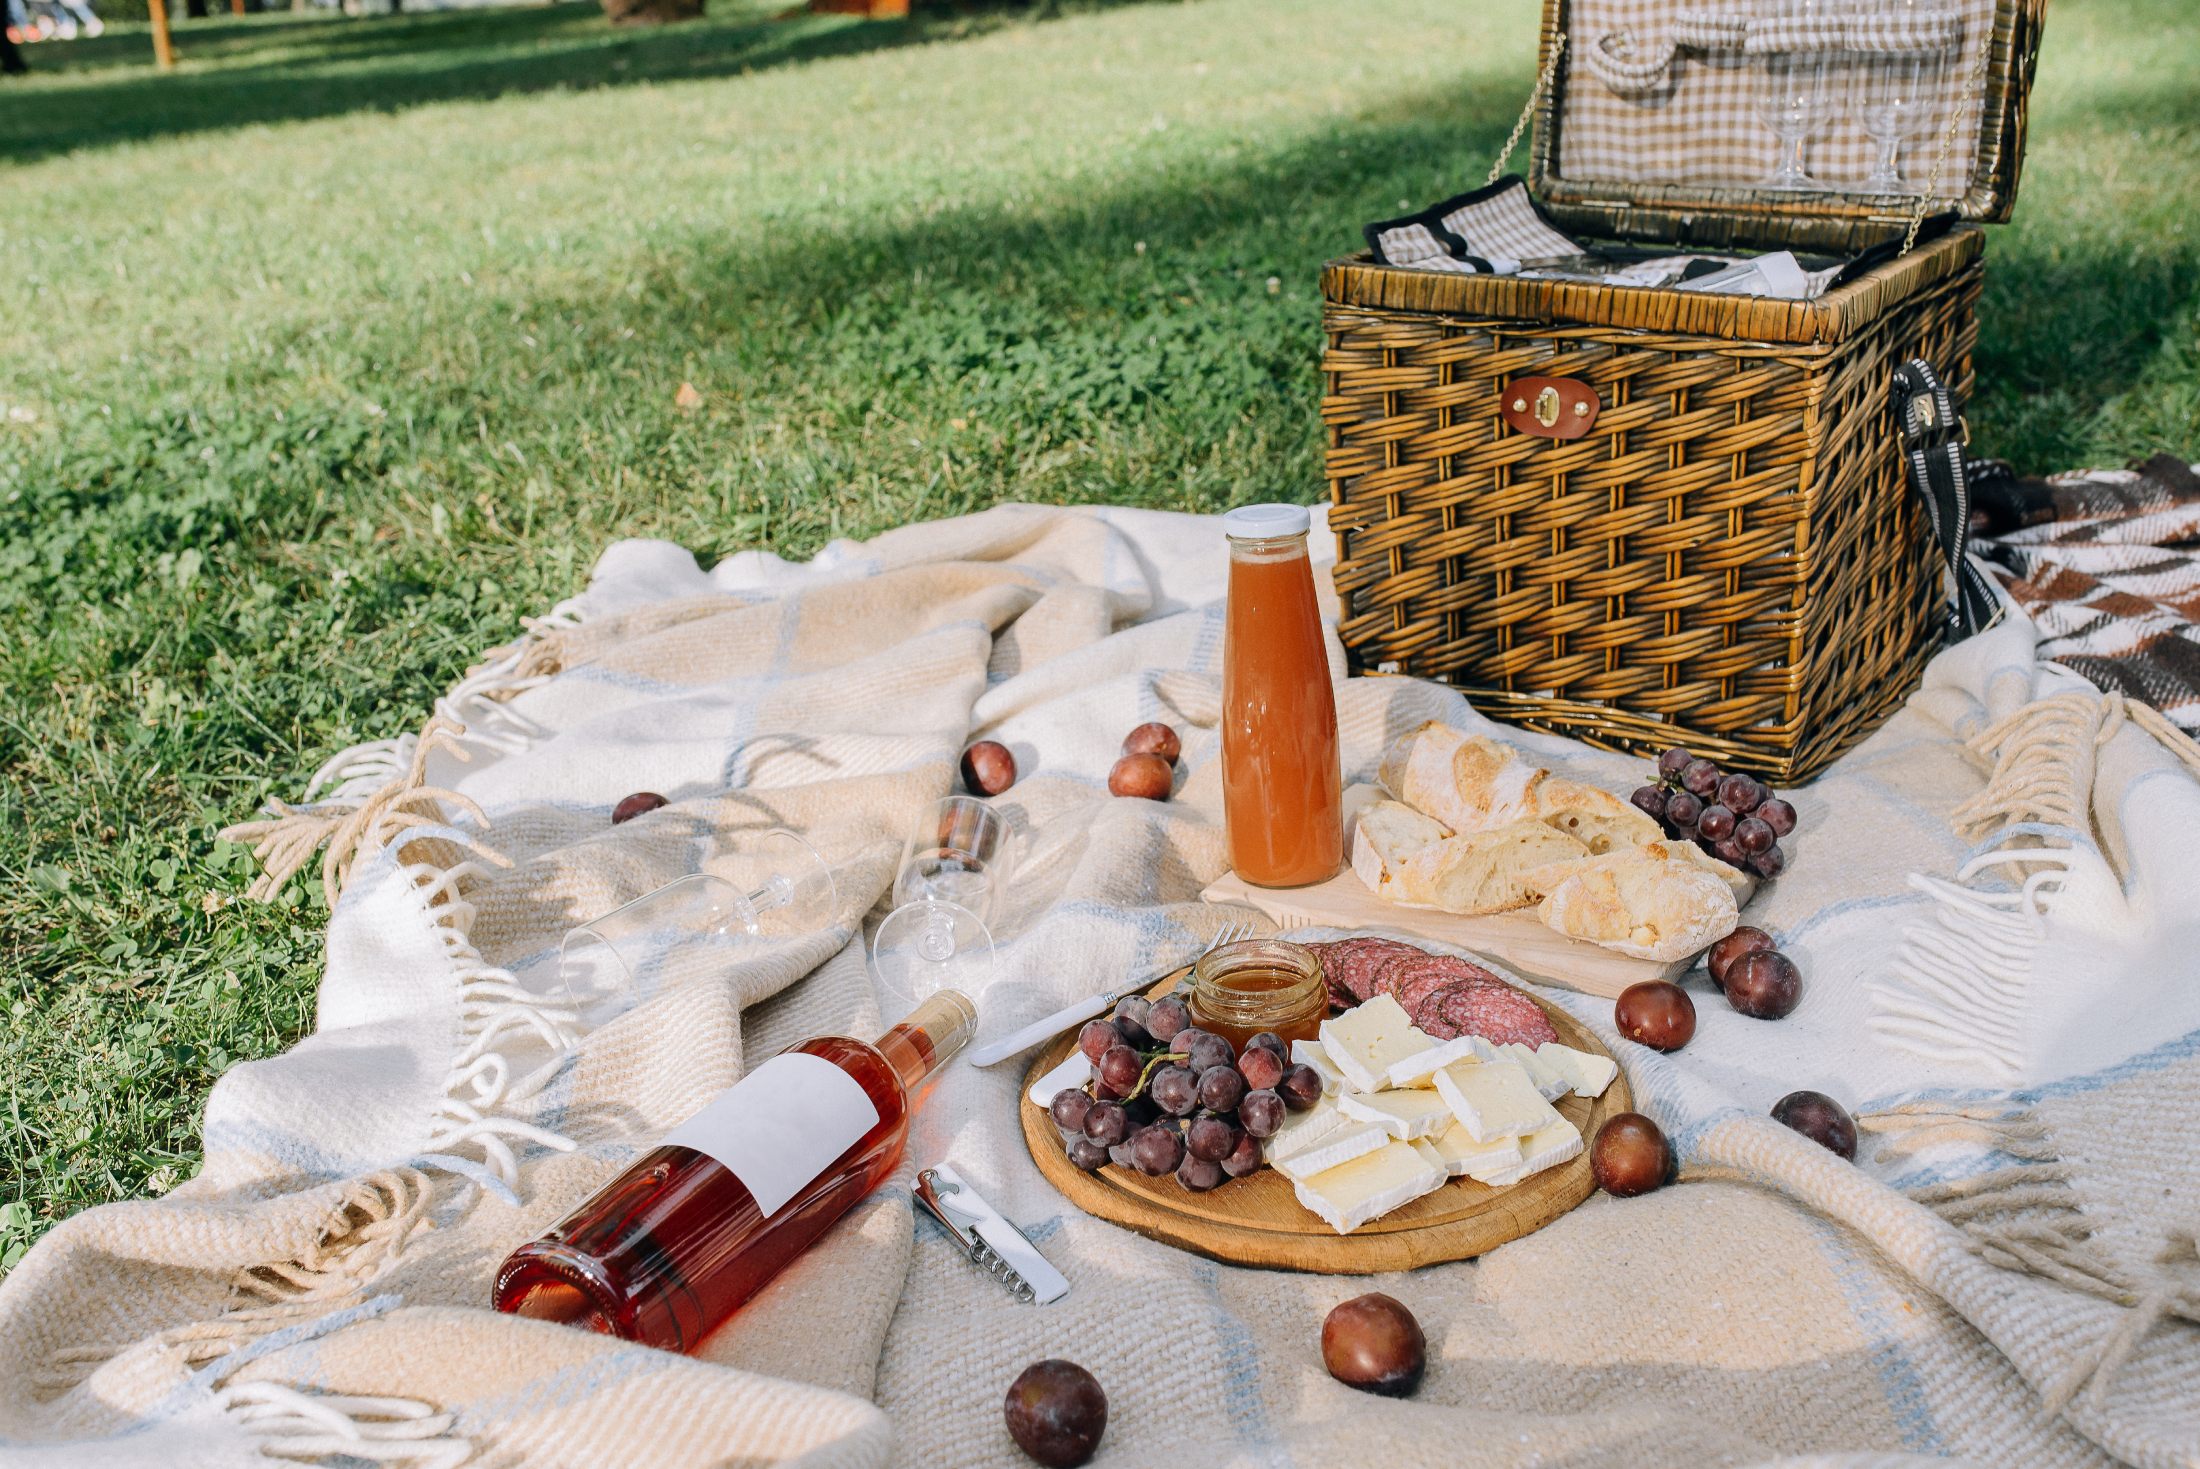 picnic on a blanket